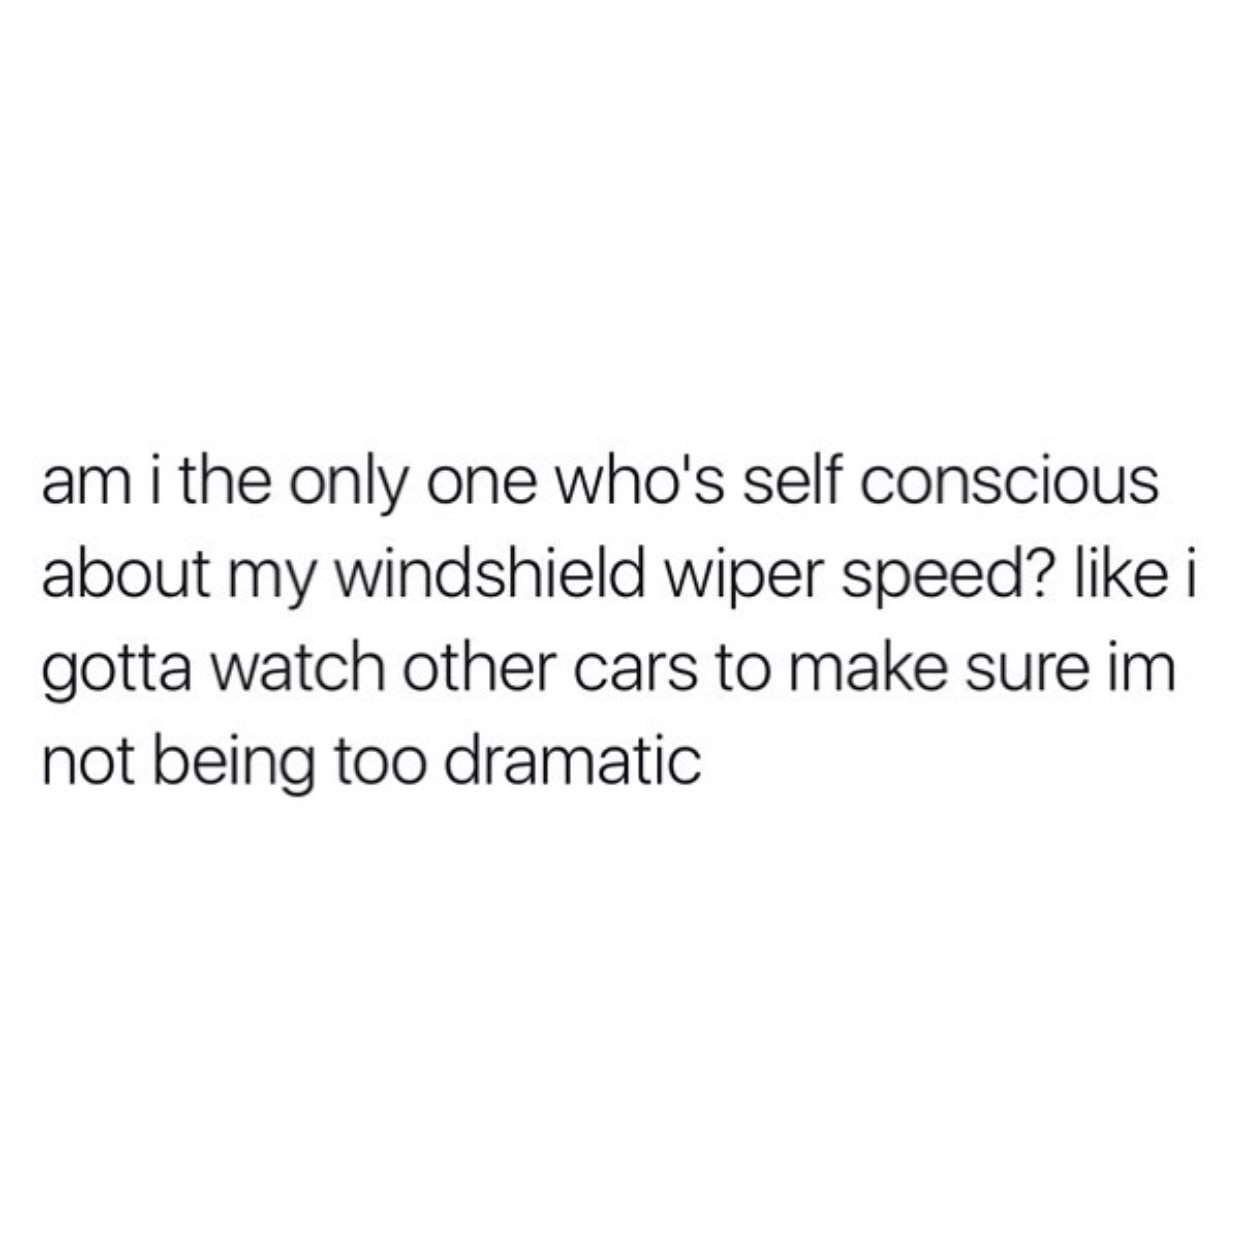 twitter quotes real shiy - am i the only one who's self conscious about my windshield wiper speed? i gotta watch other cars to make sure im not being too dramatic